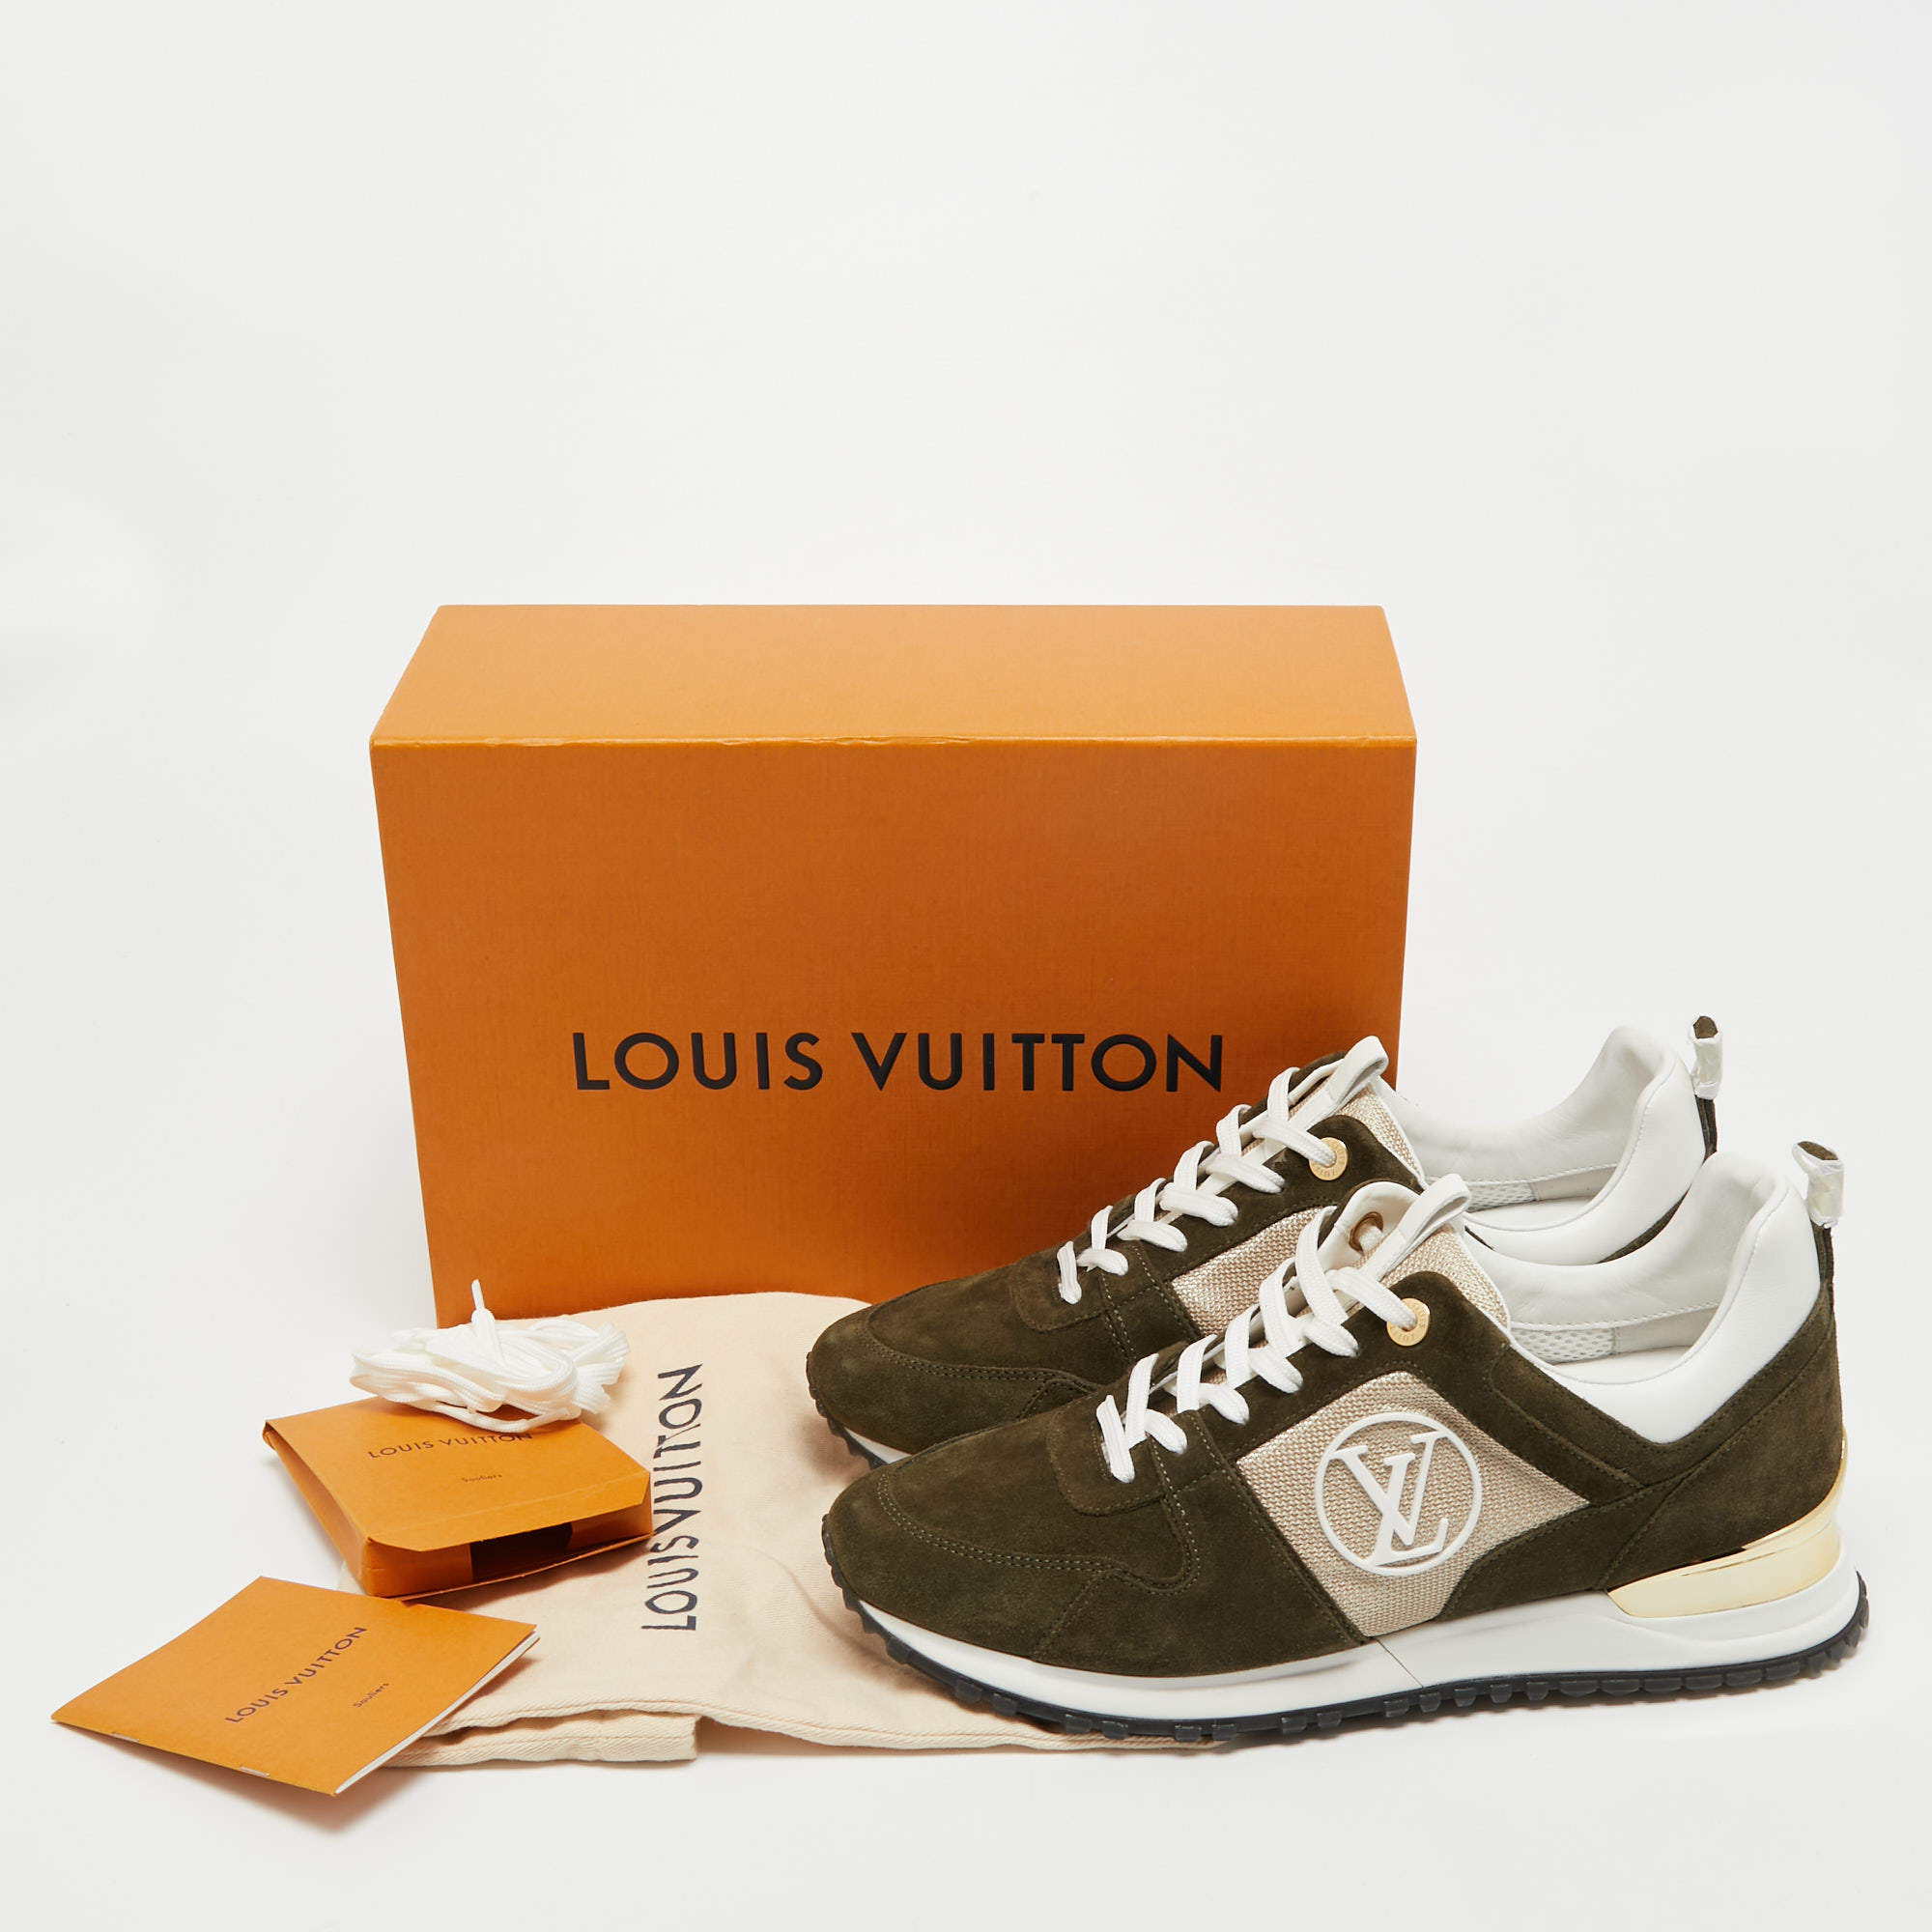 Run away leather low trainers Louis Vuitton Green size 40 EU in Leather -  31959719